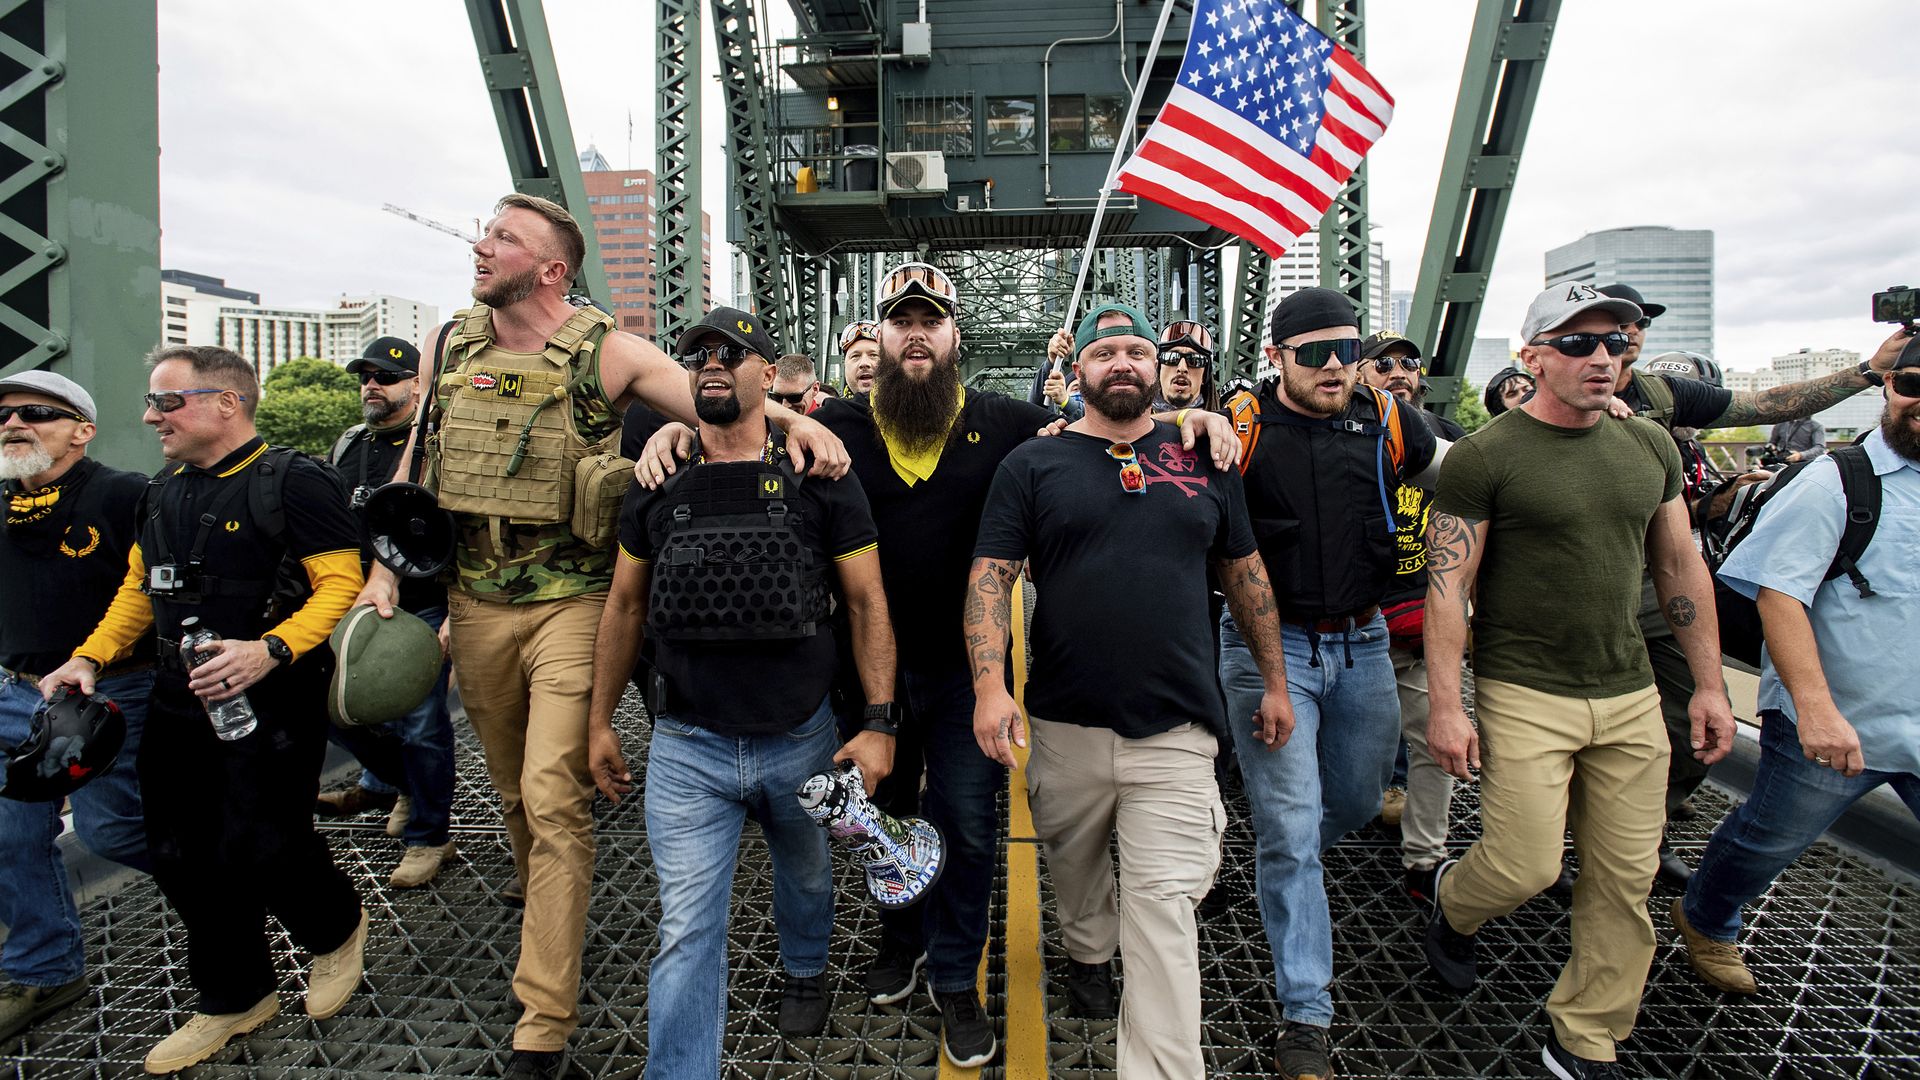 Members of the Proud Boys and other right-wing demonstrators march across the Hawthorne Bridge 